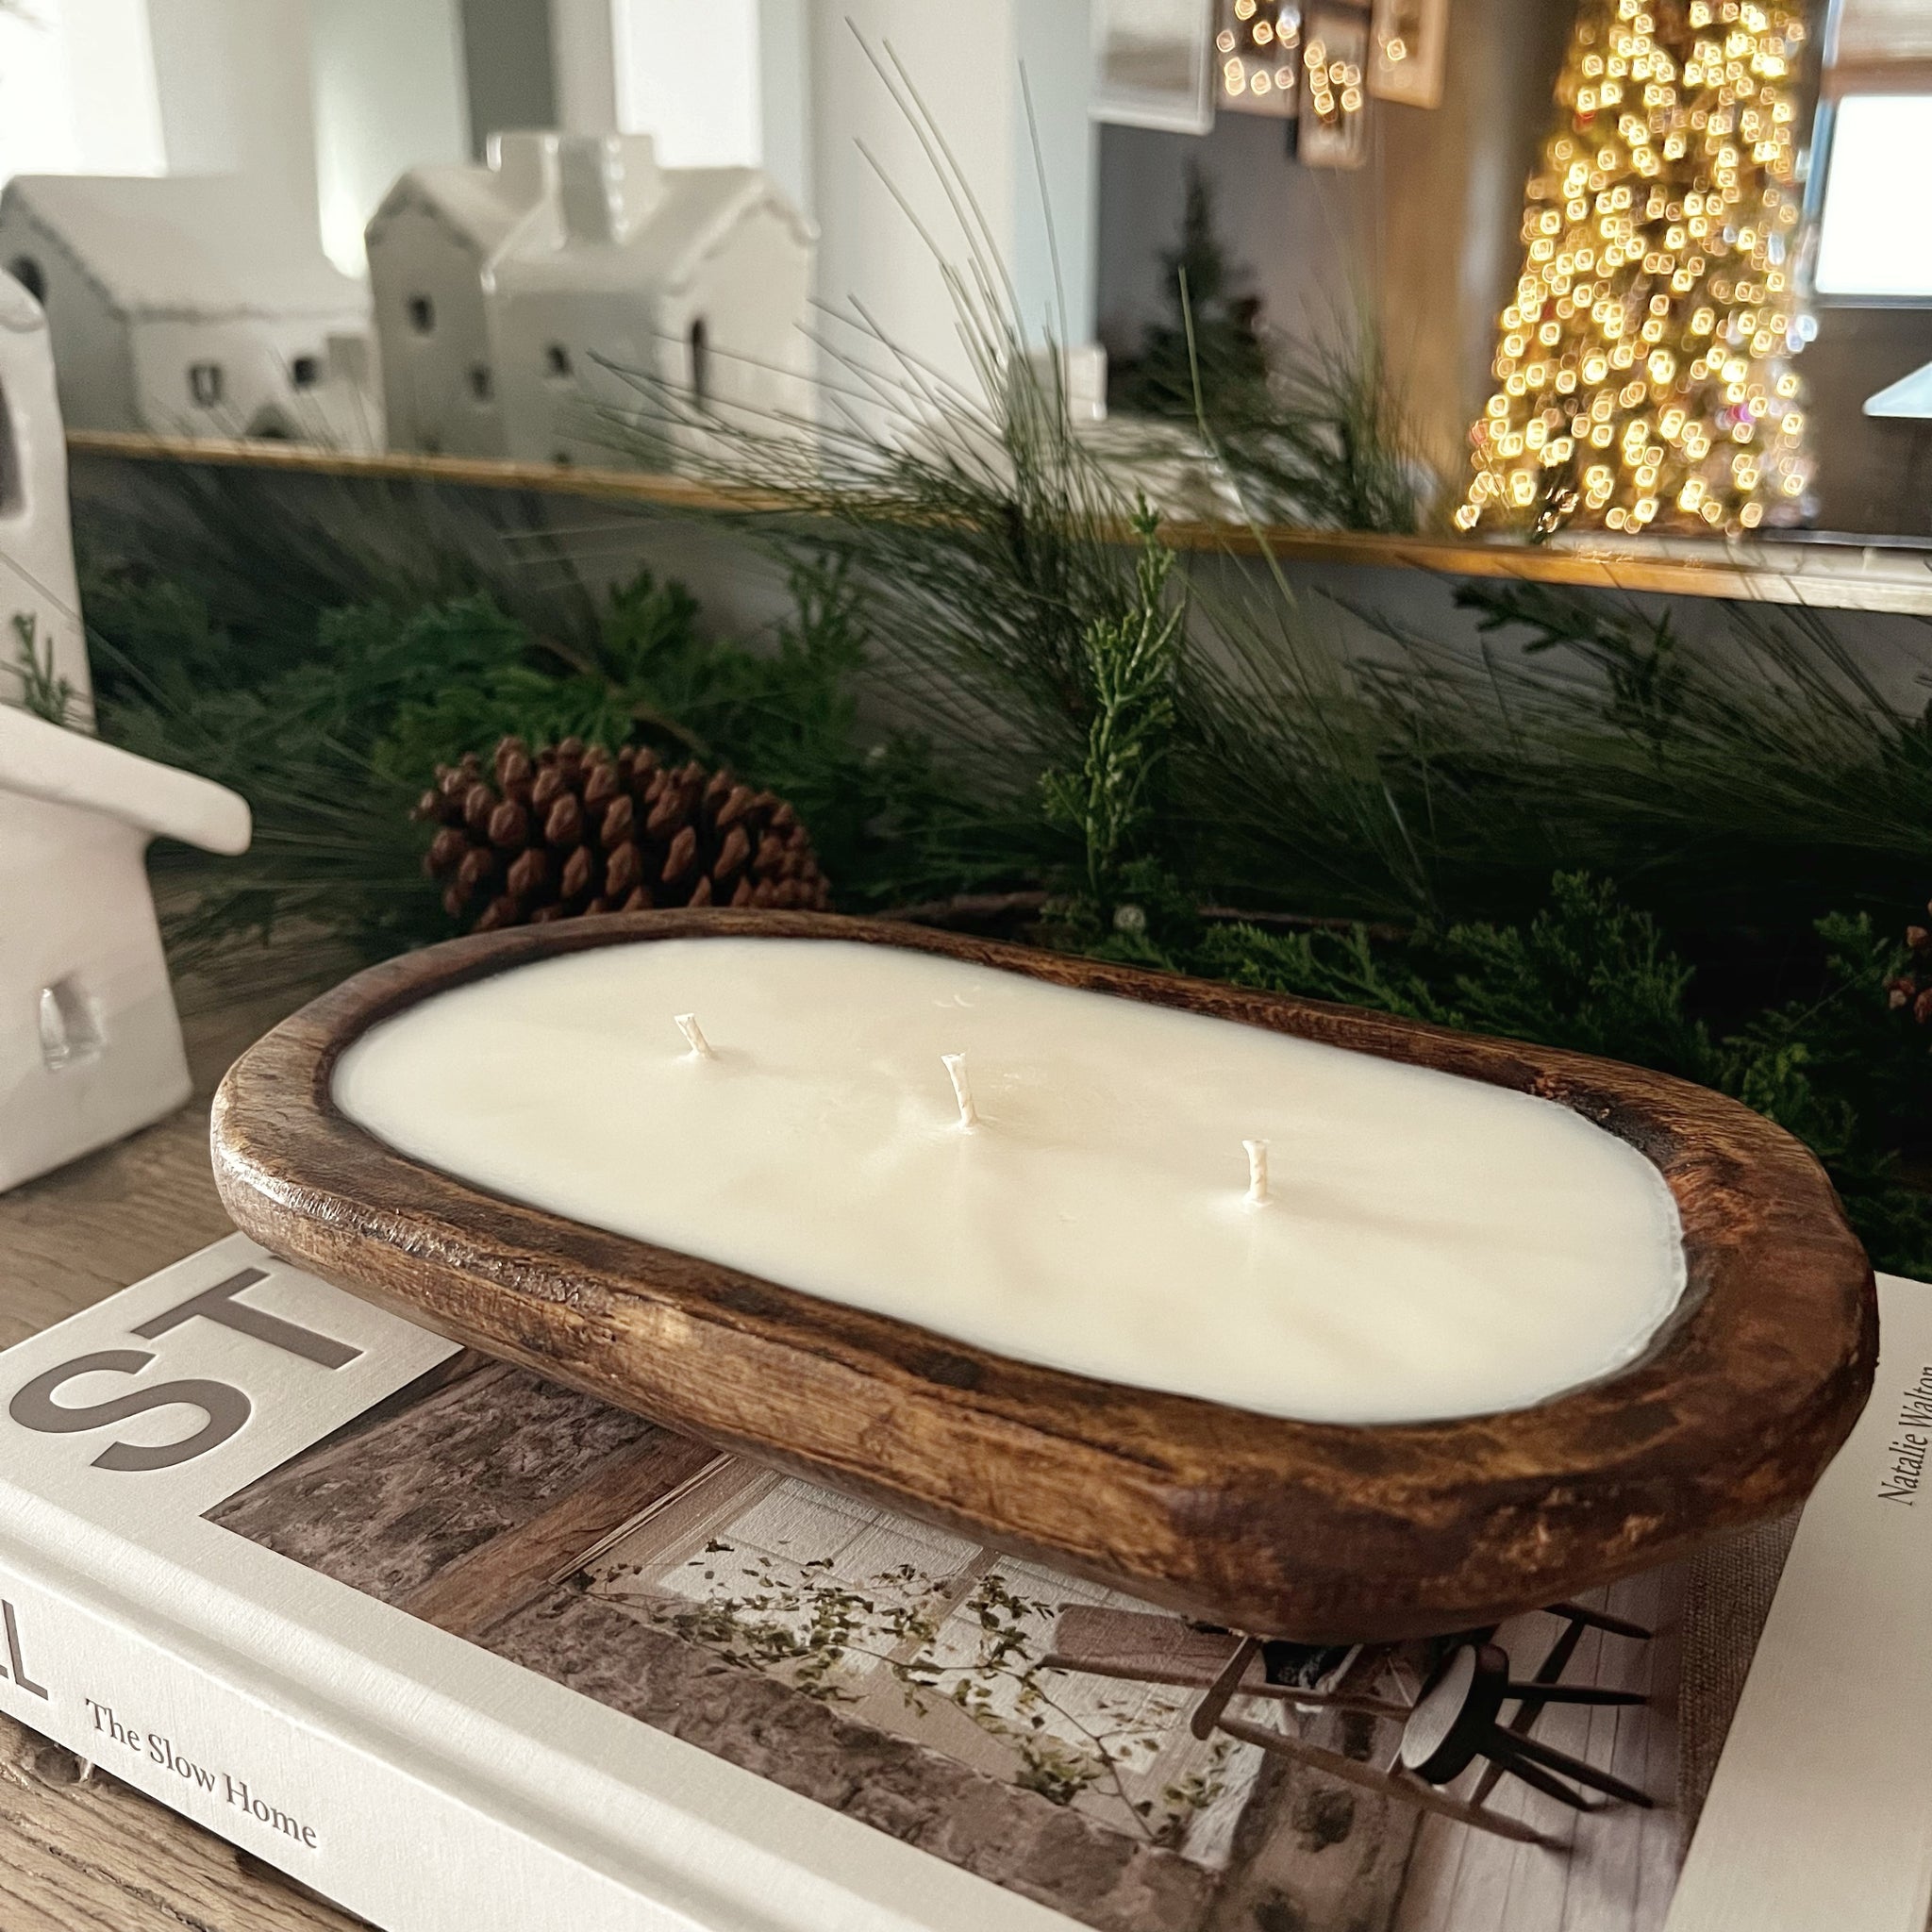 Limited Edition Handmade Dough Bowl Candle